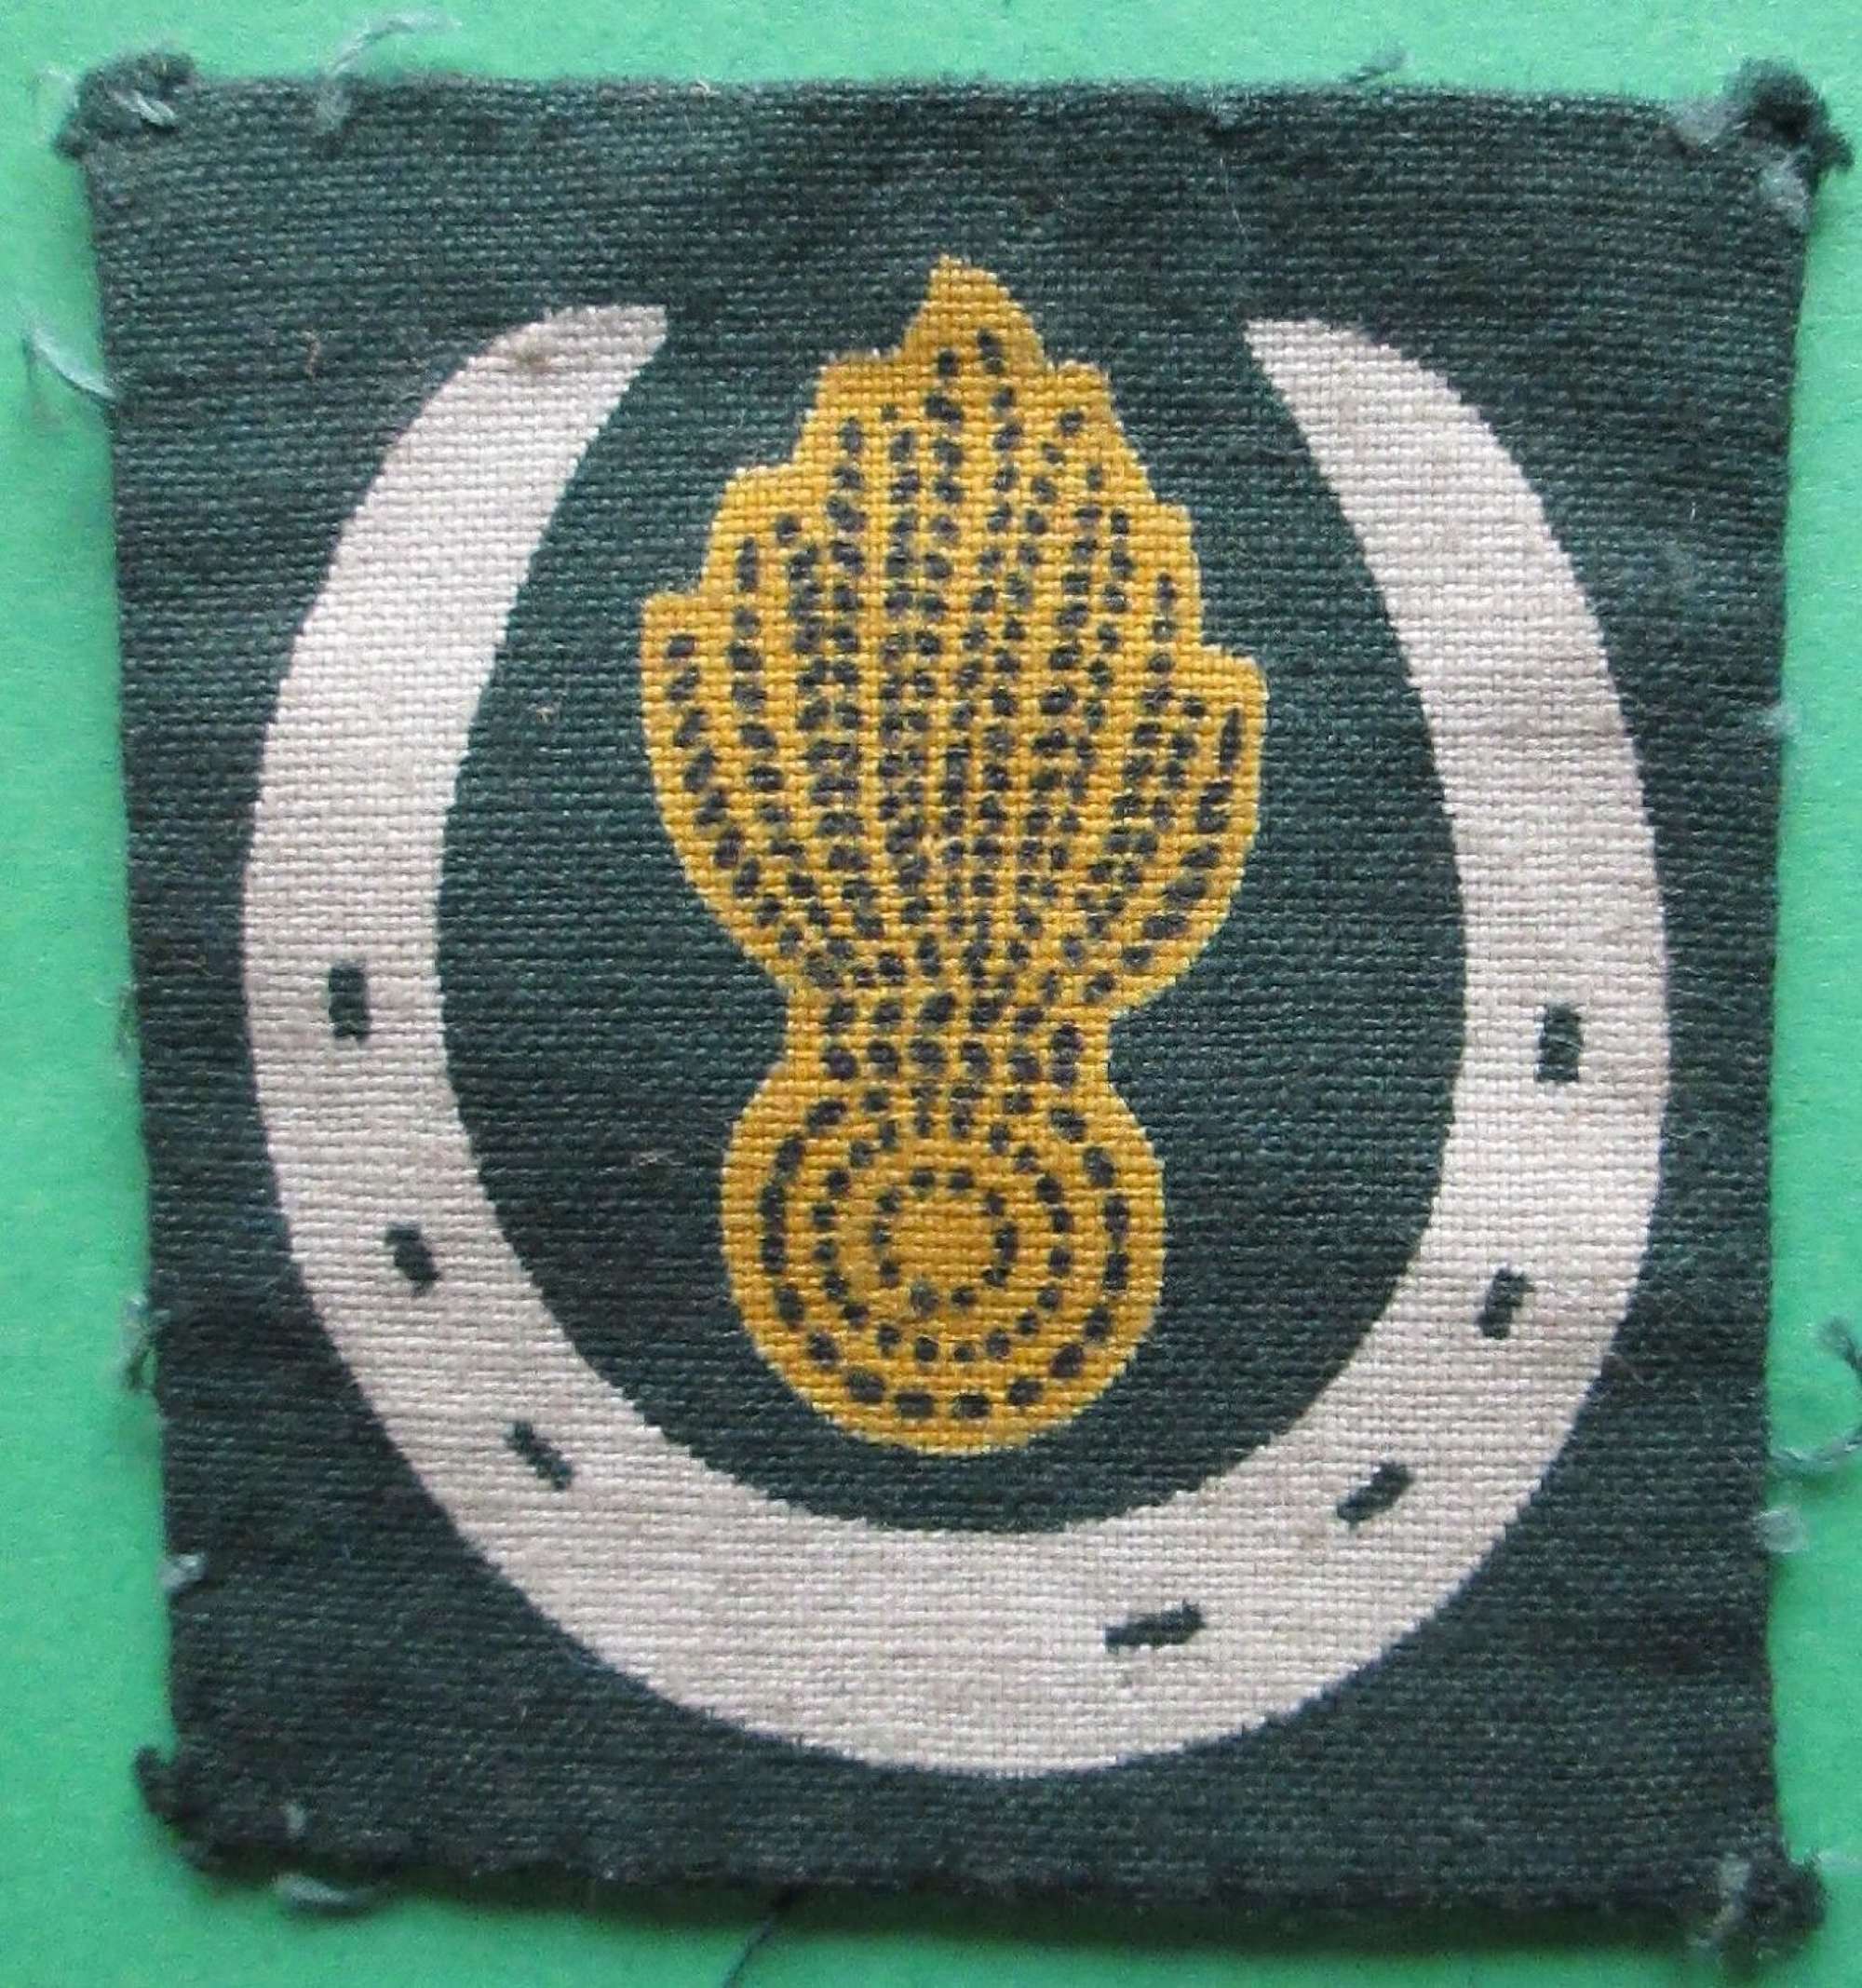 A 89th ARMY GROUP ROYAL ARTILLERY FORMATION PATCH